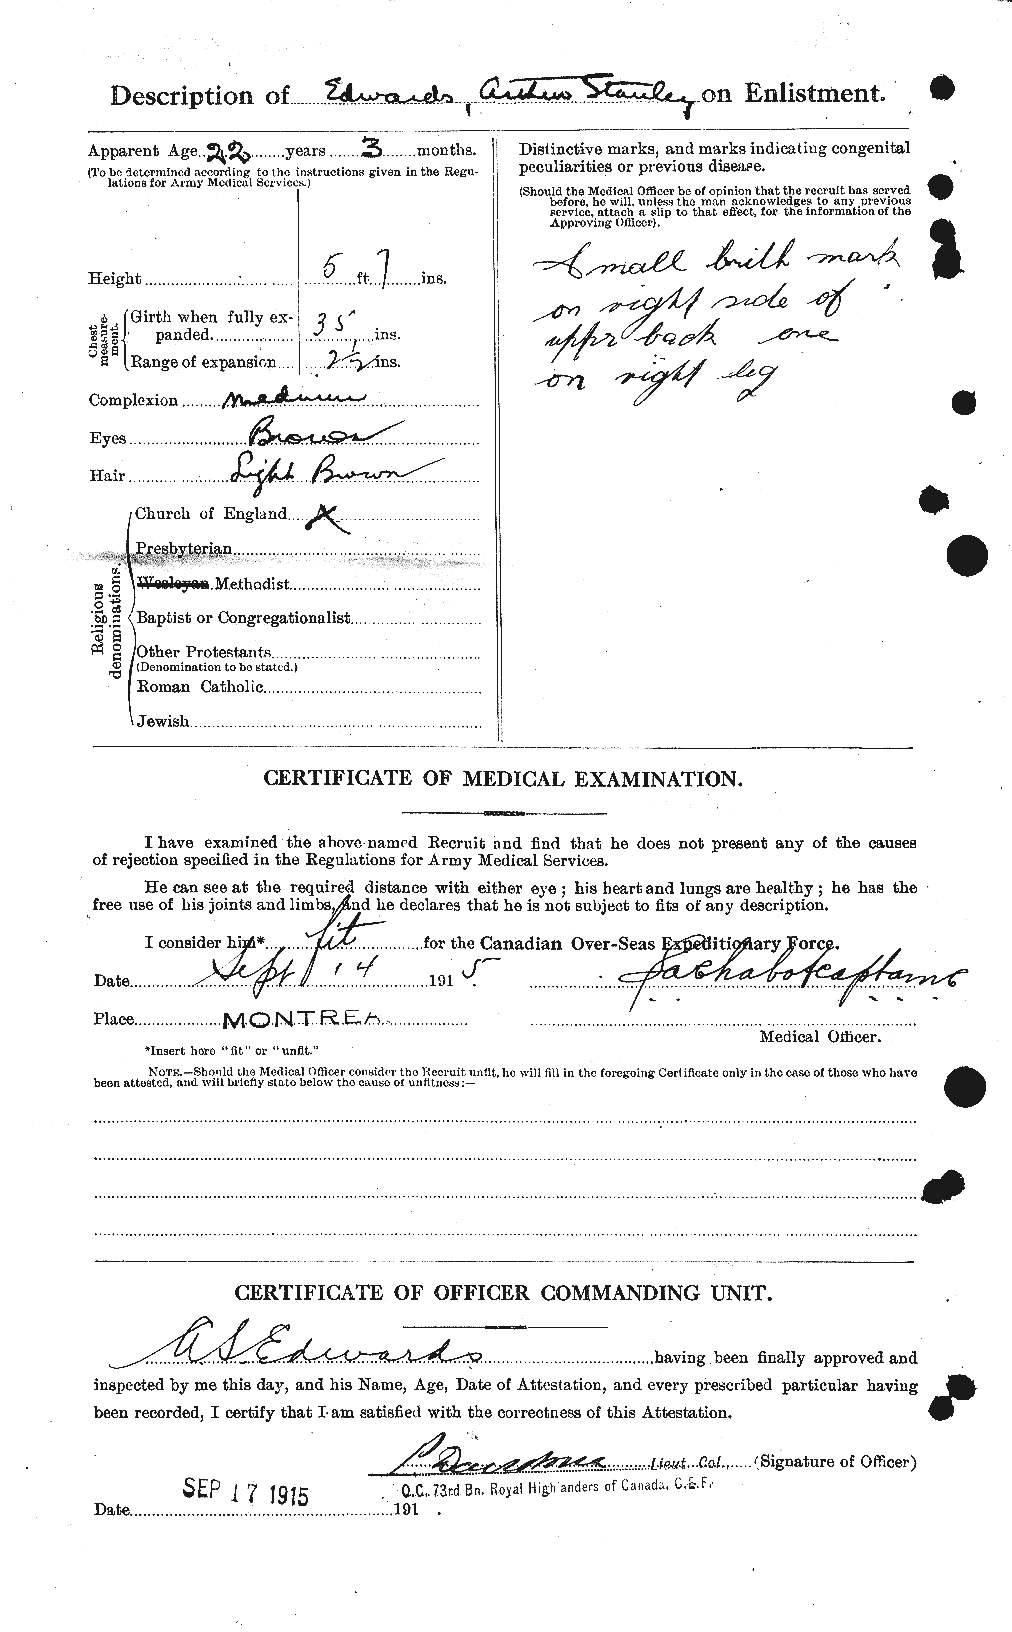 Personnel Records of the First World War - CEF 313145b